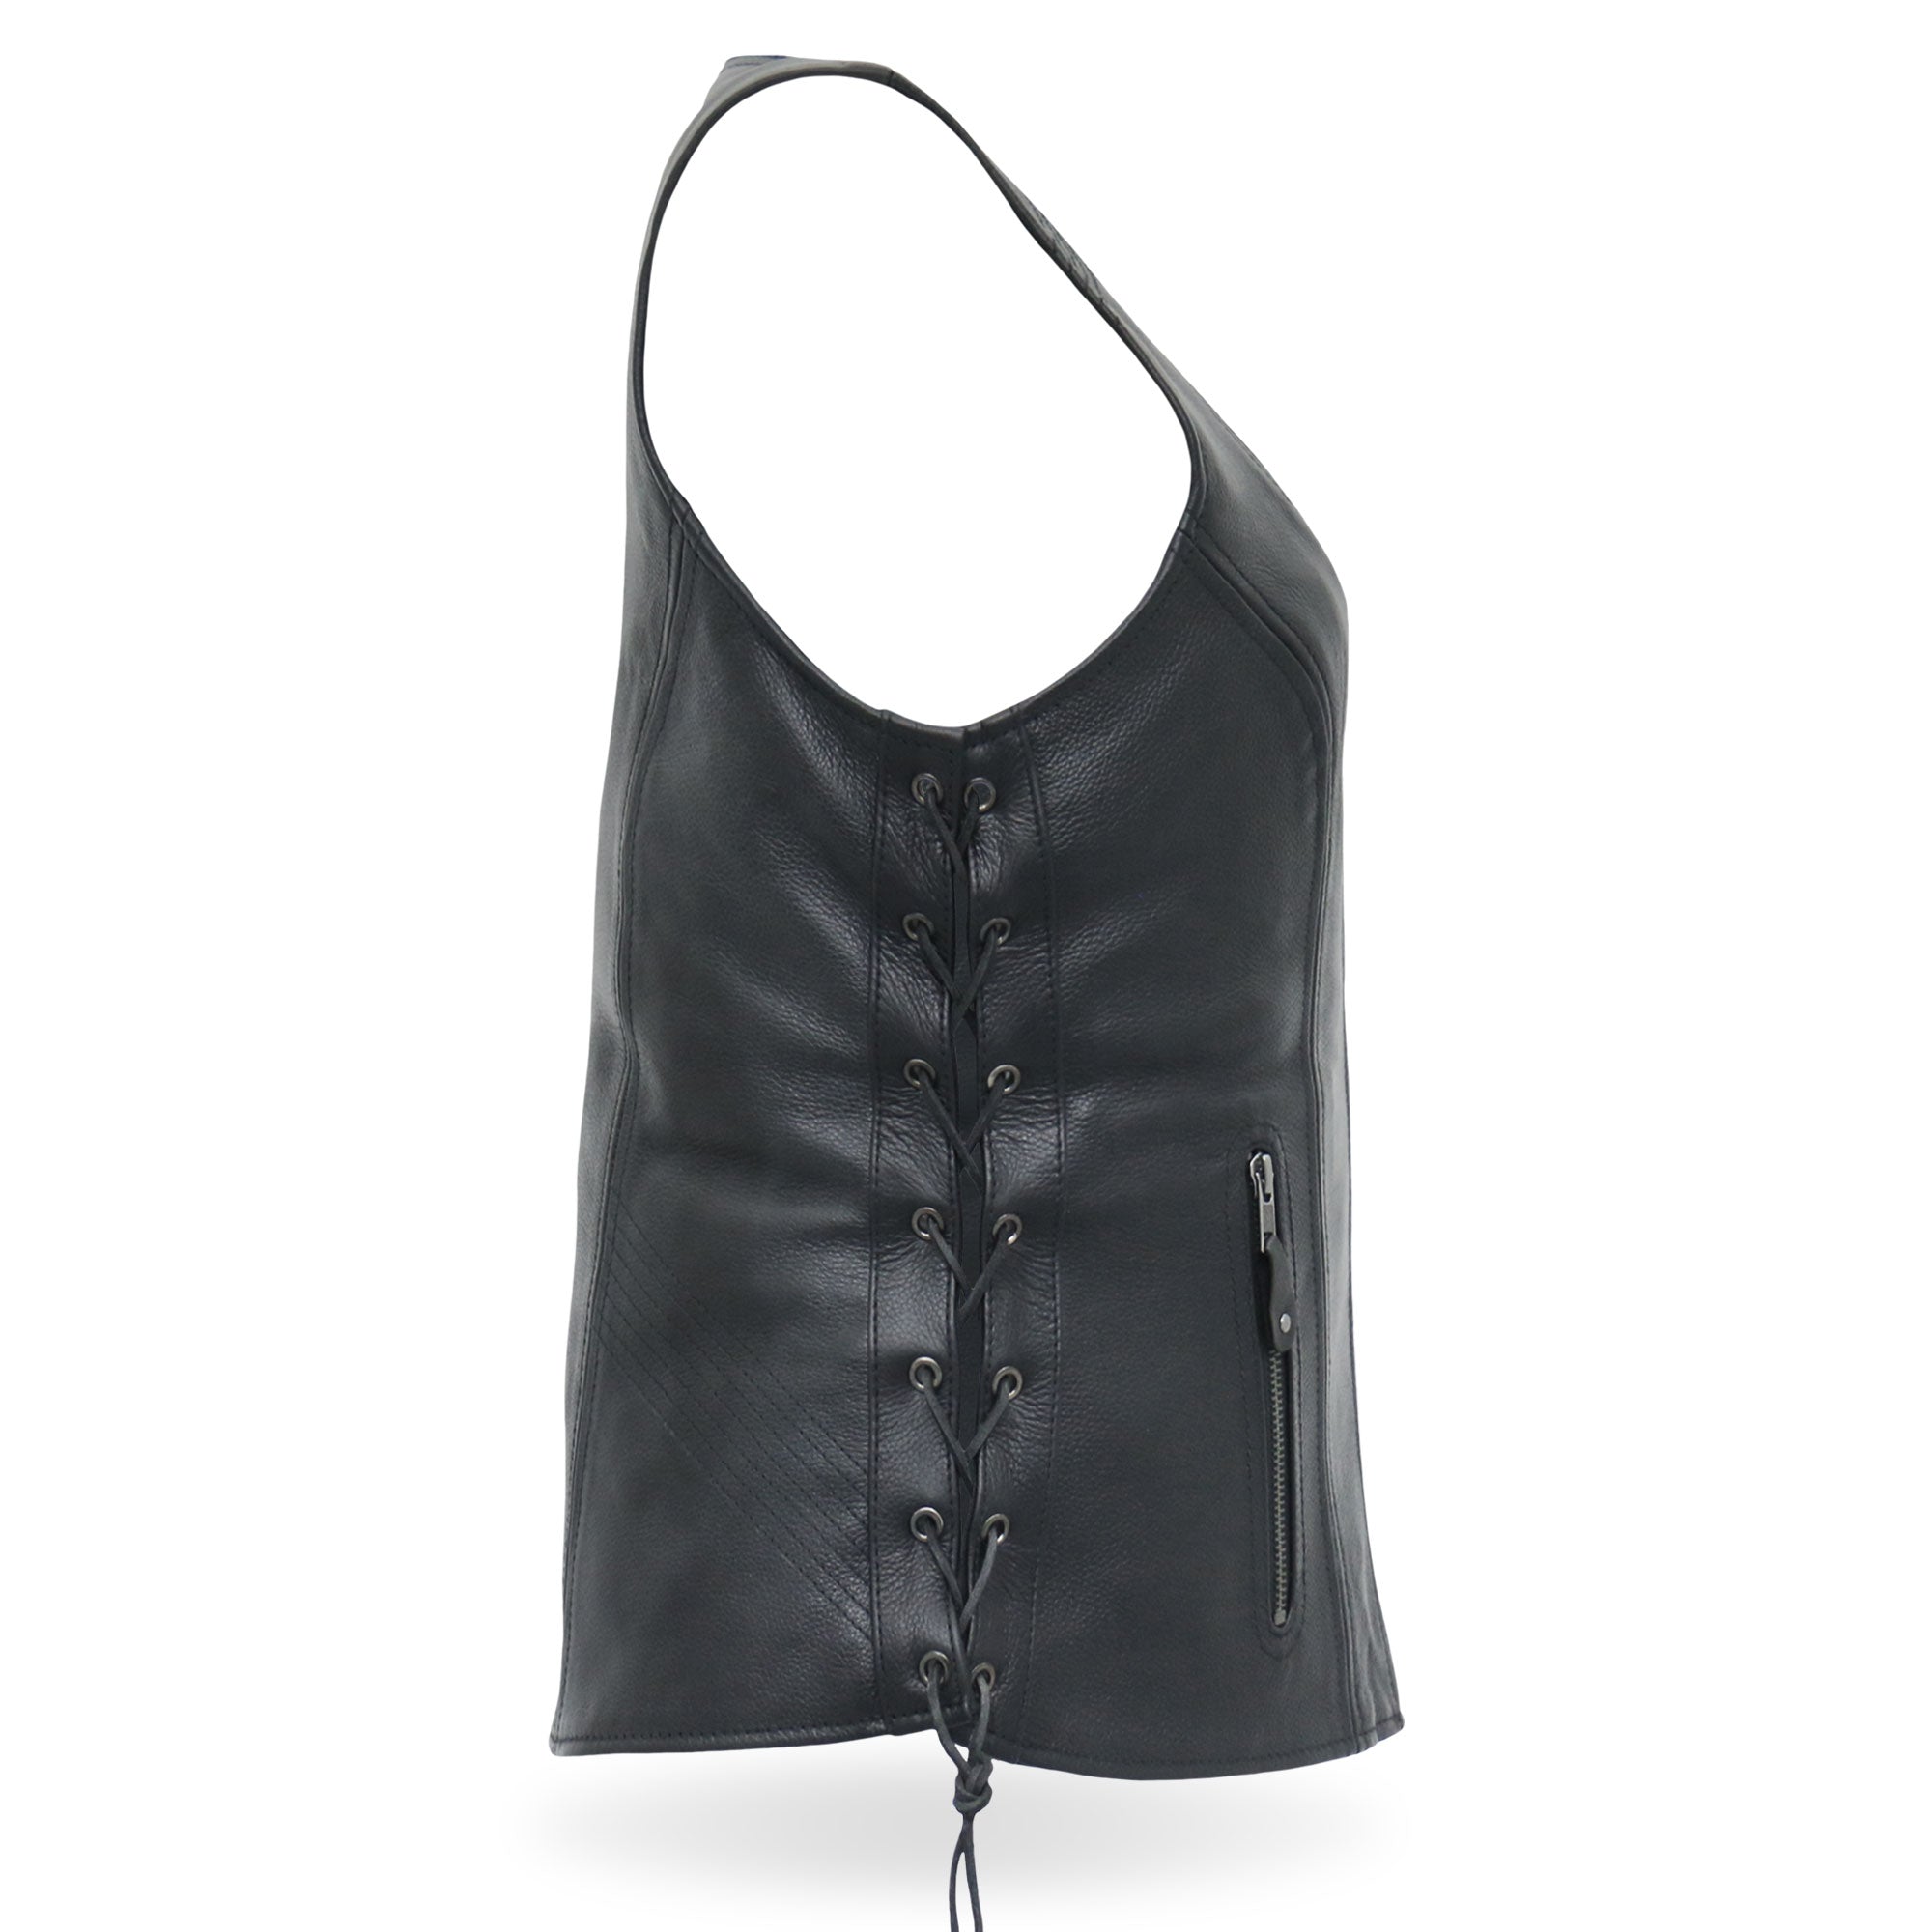 Vest Side Lace Leather Extenders - Set of Two 